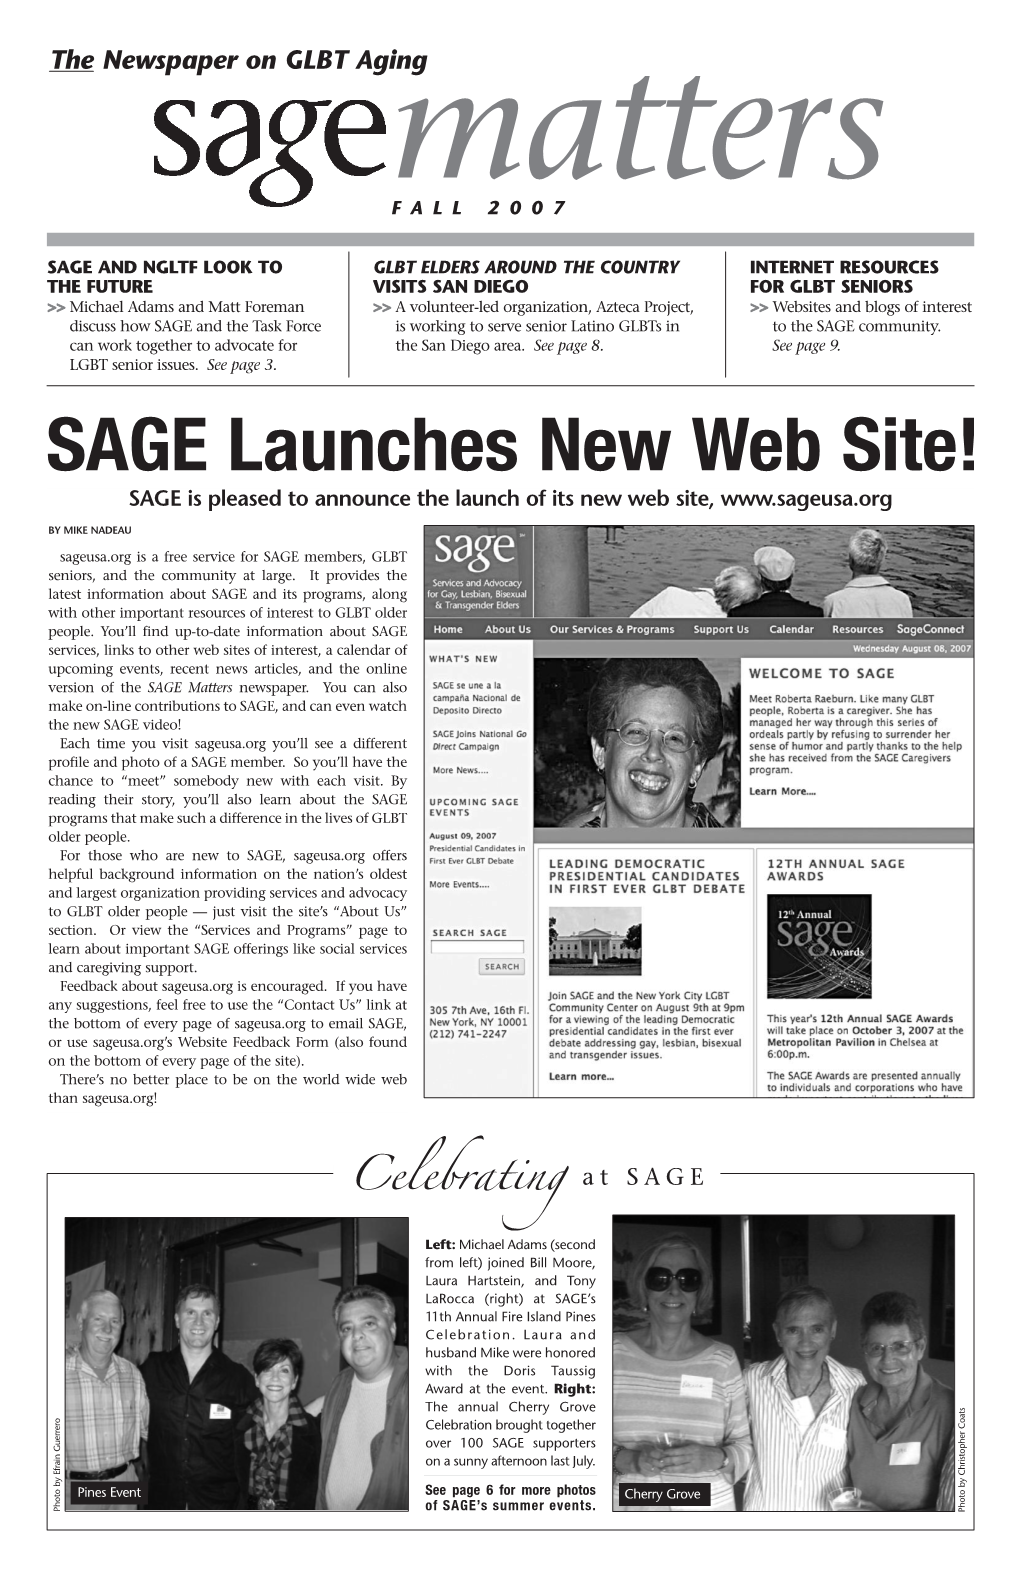 SAGE Launches New Web Site! SAGE Is Pleased to Announce the Launch of Its New Web Site